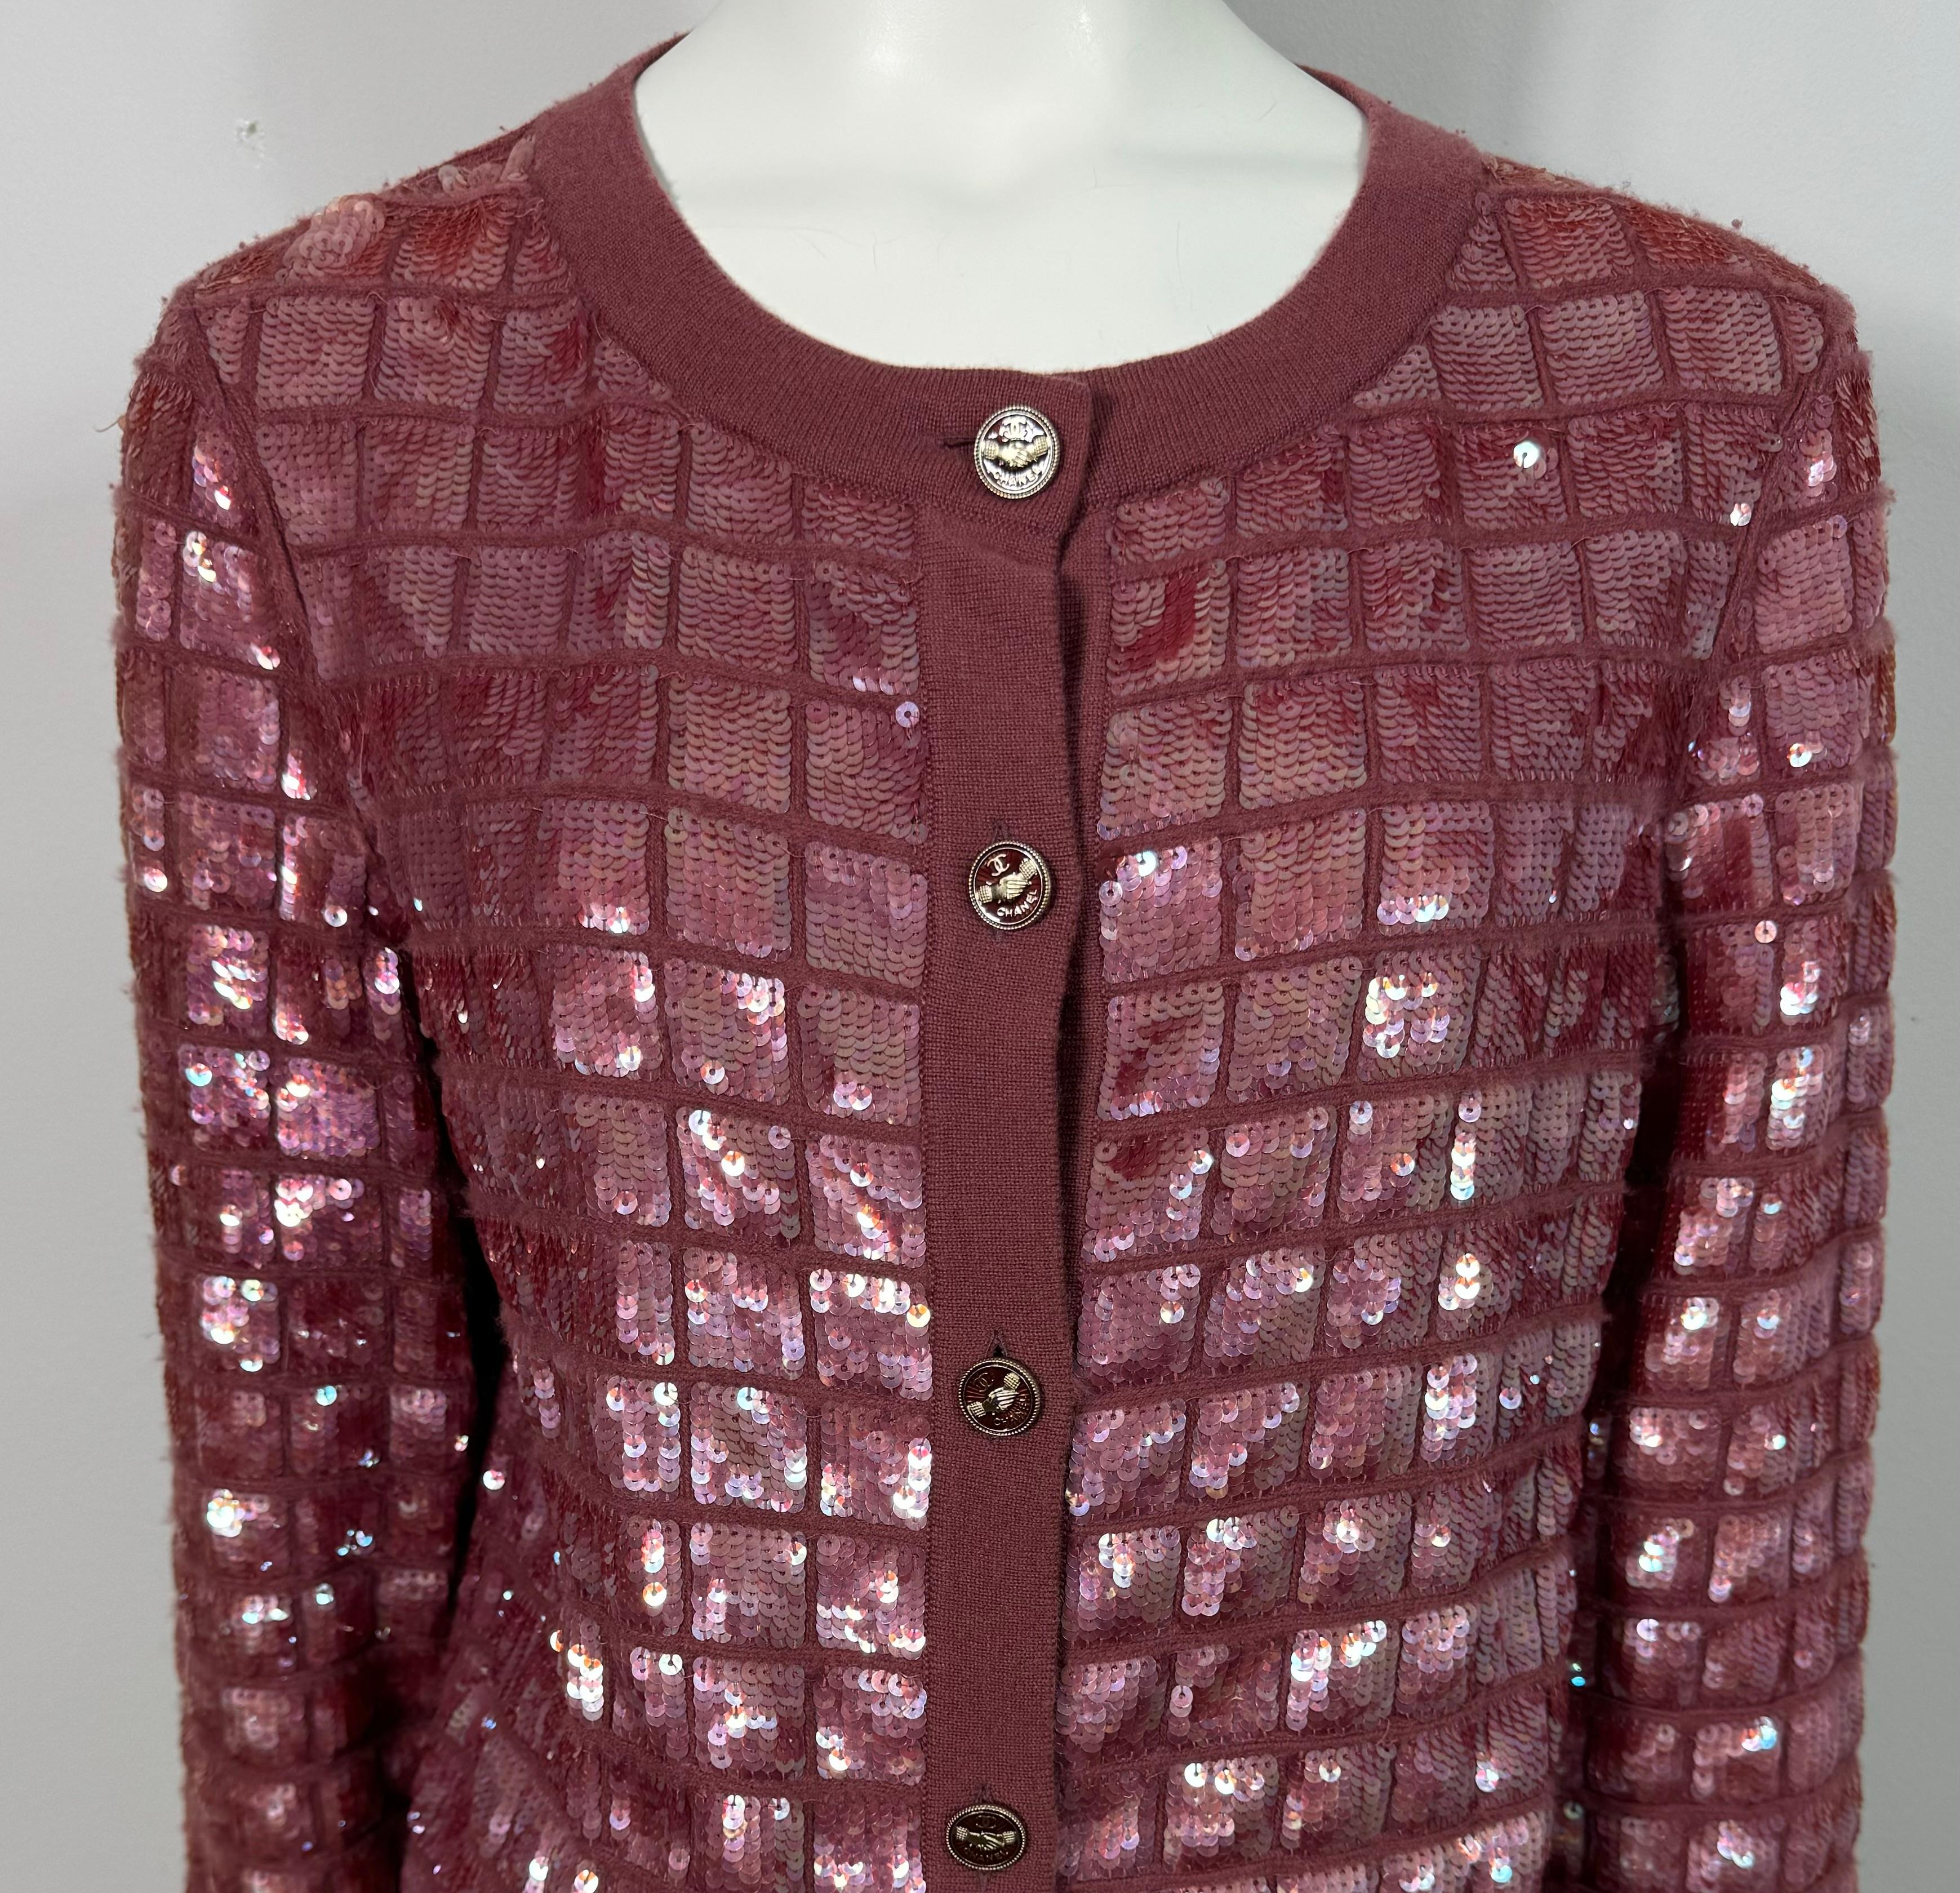 Chanel Spring 2008 Mauve Sequin Embellished Cashmere Cardigan-Size 40 In Excellent Condition For Sale In West Palm Beach, FL